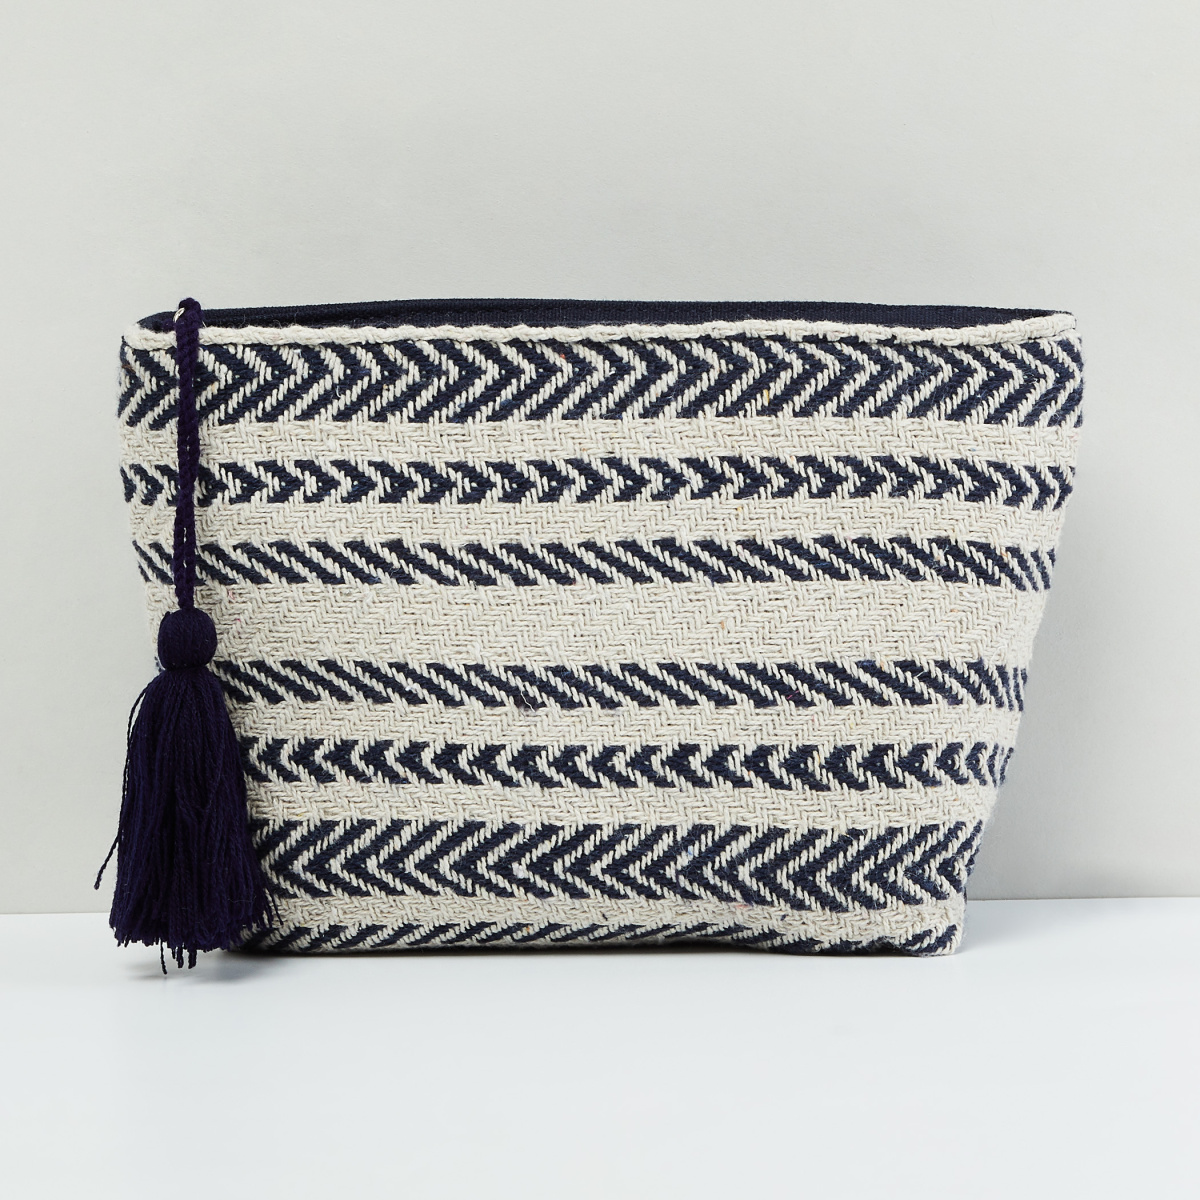 MAX Embroidered Pouch with Tassels